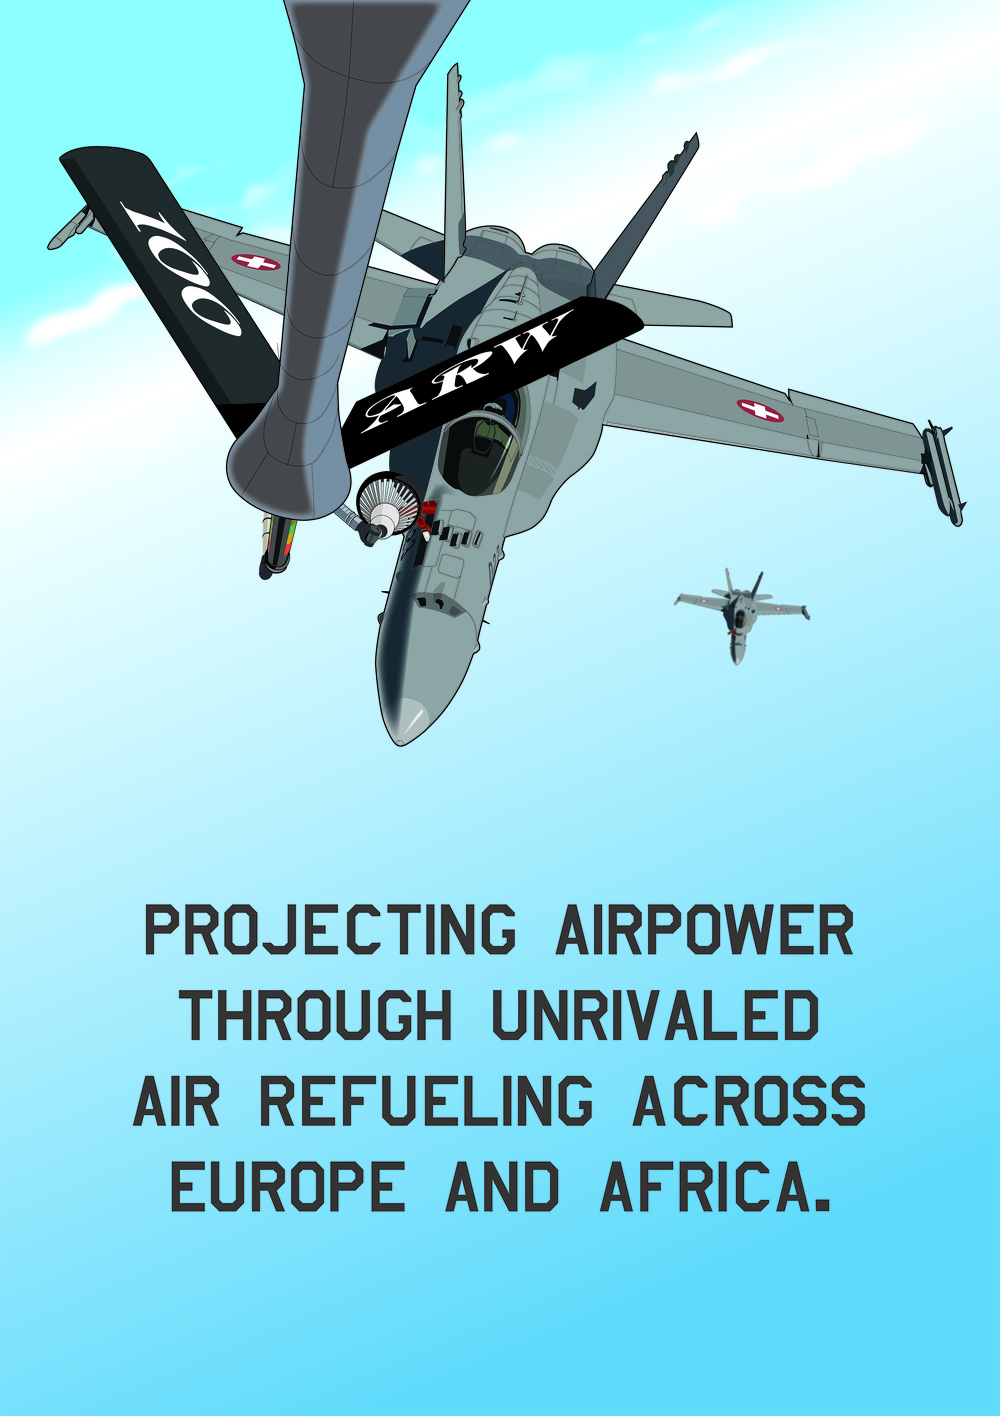 Projecting airpower through unrivaled air refueling across Europe and Africa.